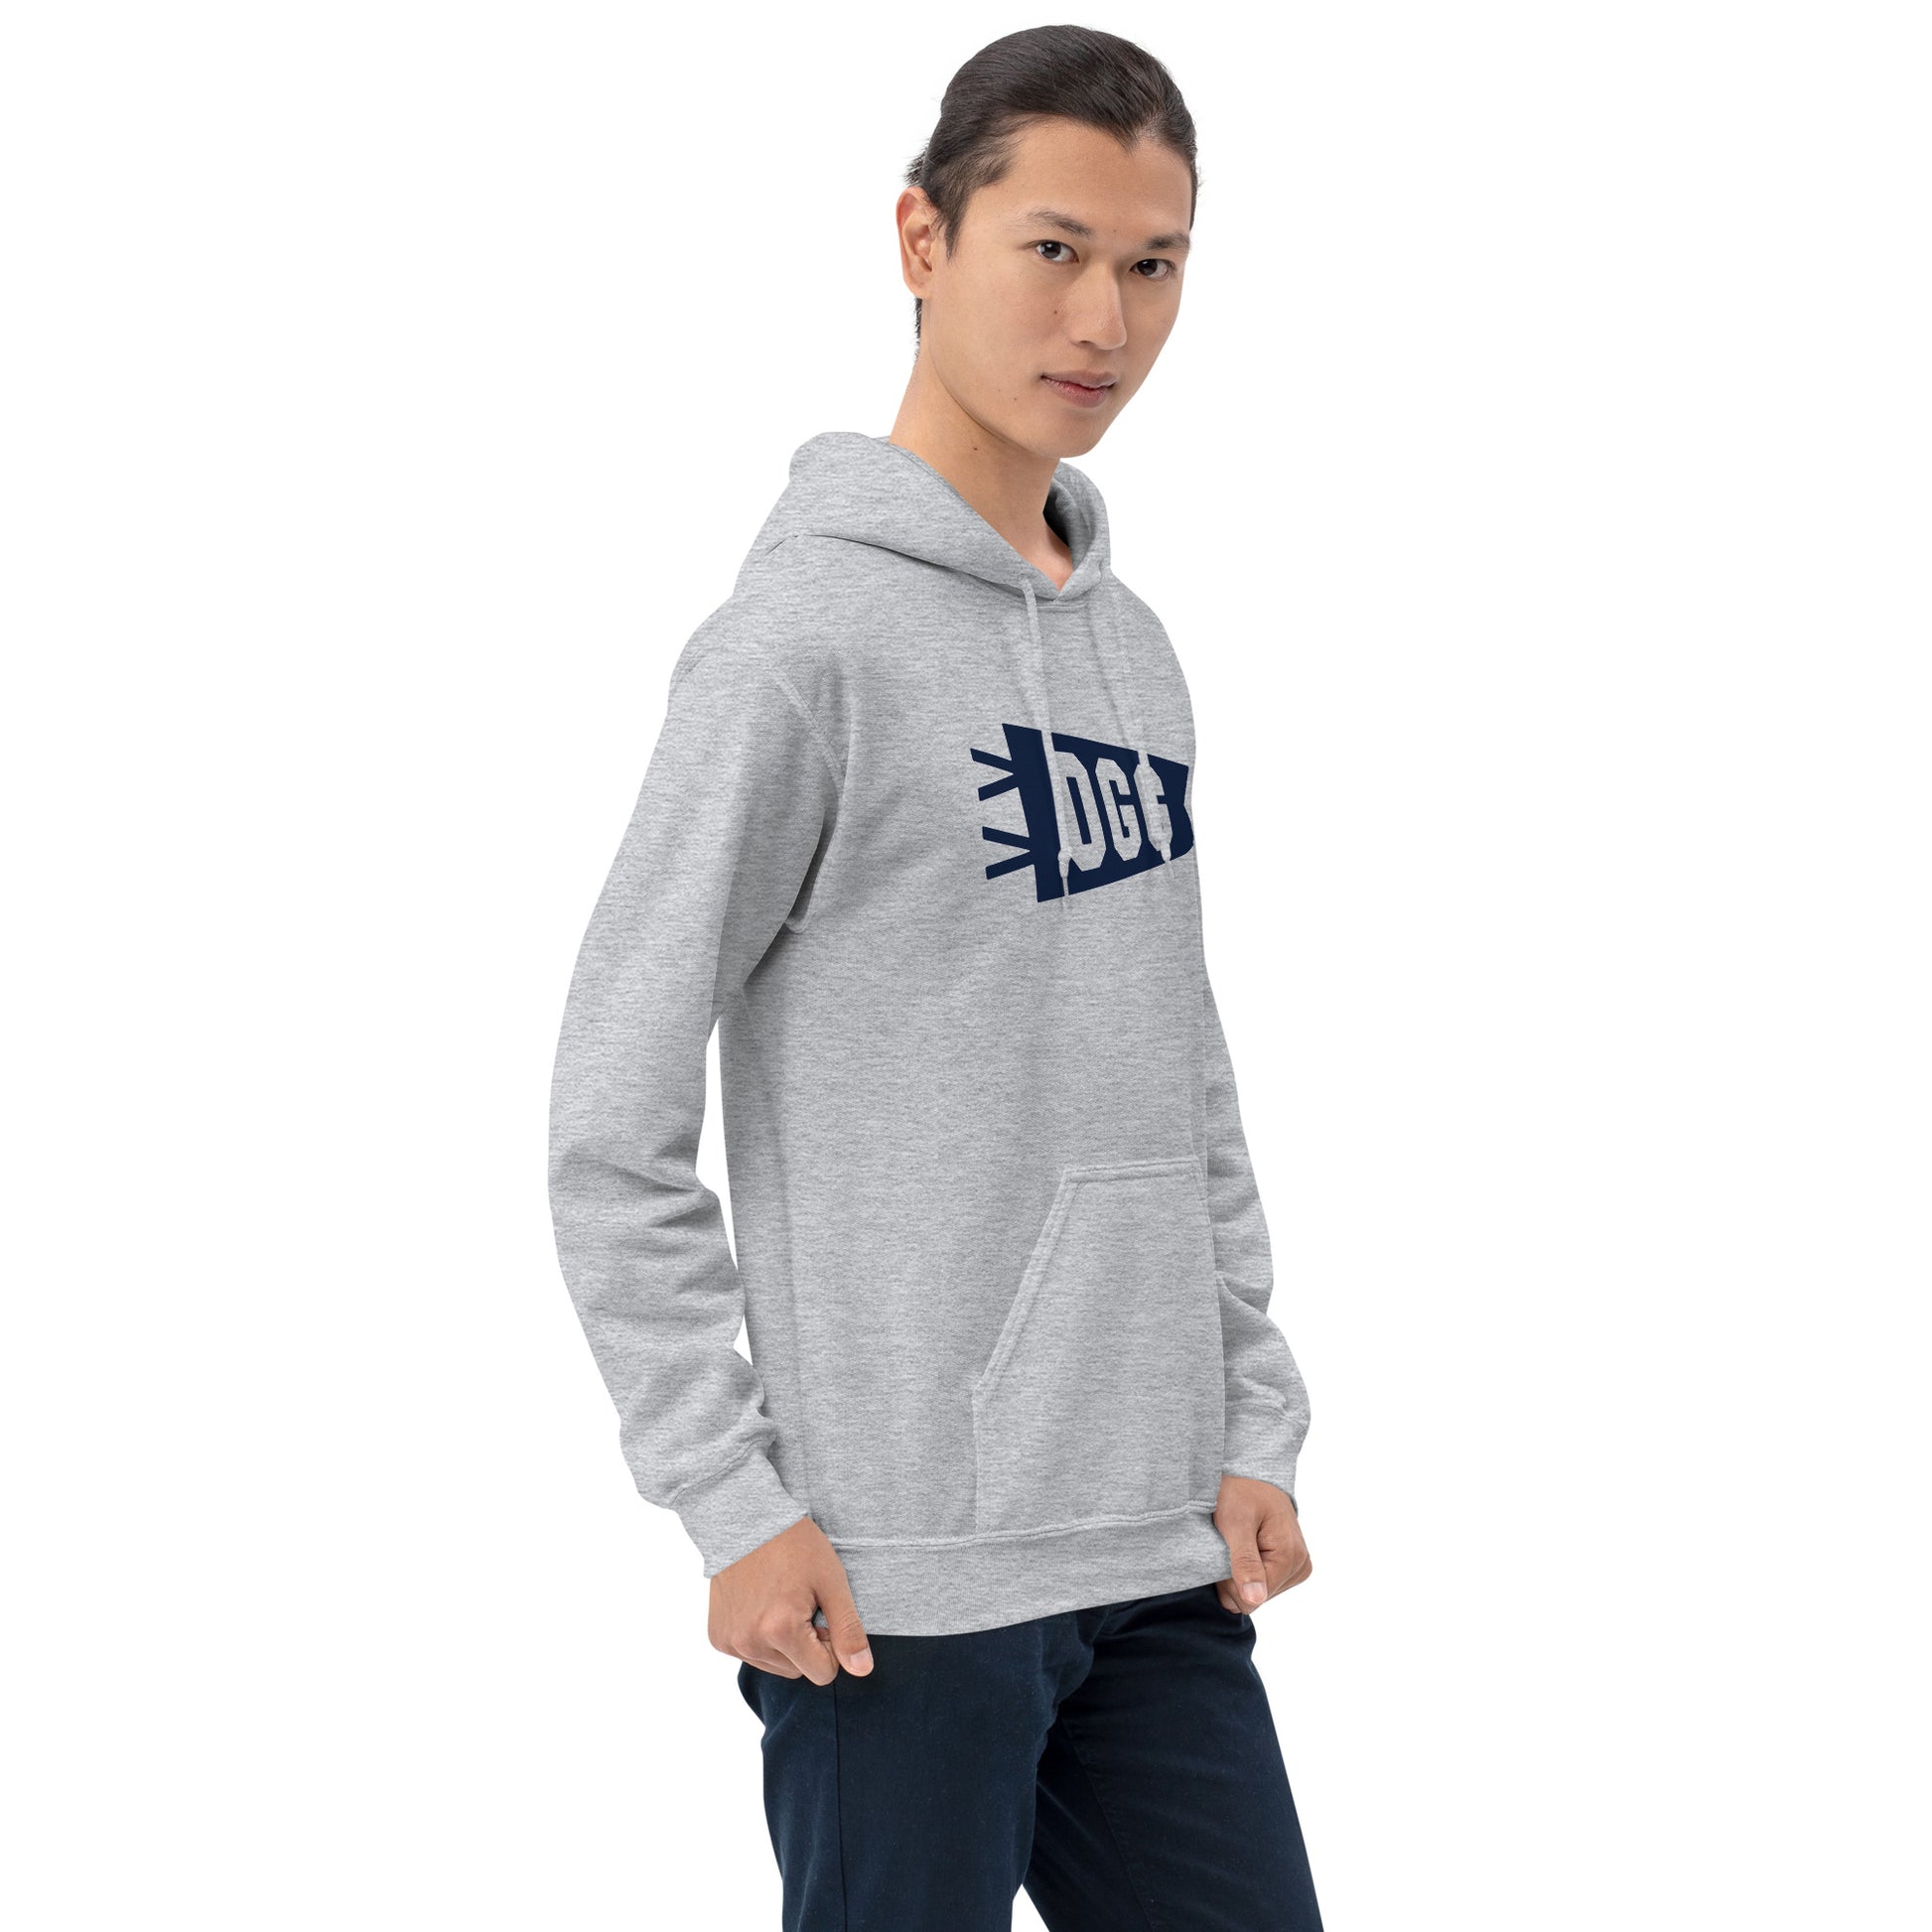 Airport Code Unisex Hoodie - Navy Blue Graphic • OGG Maui • YHM Designs - Image 09